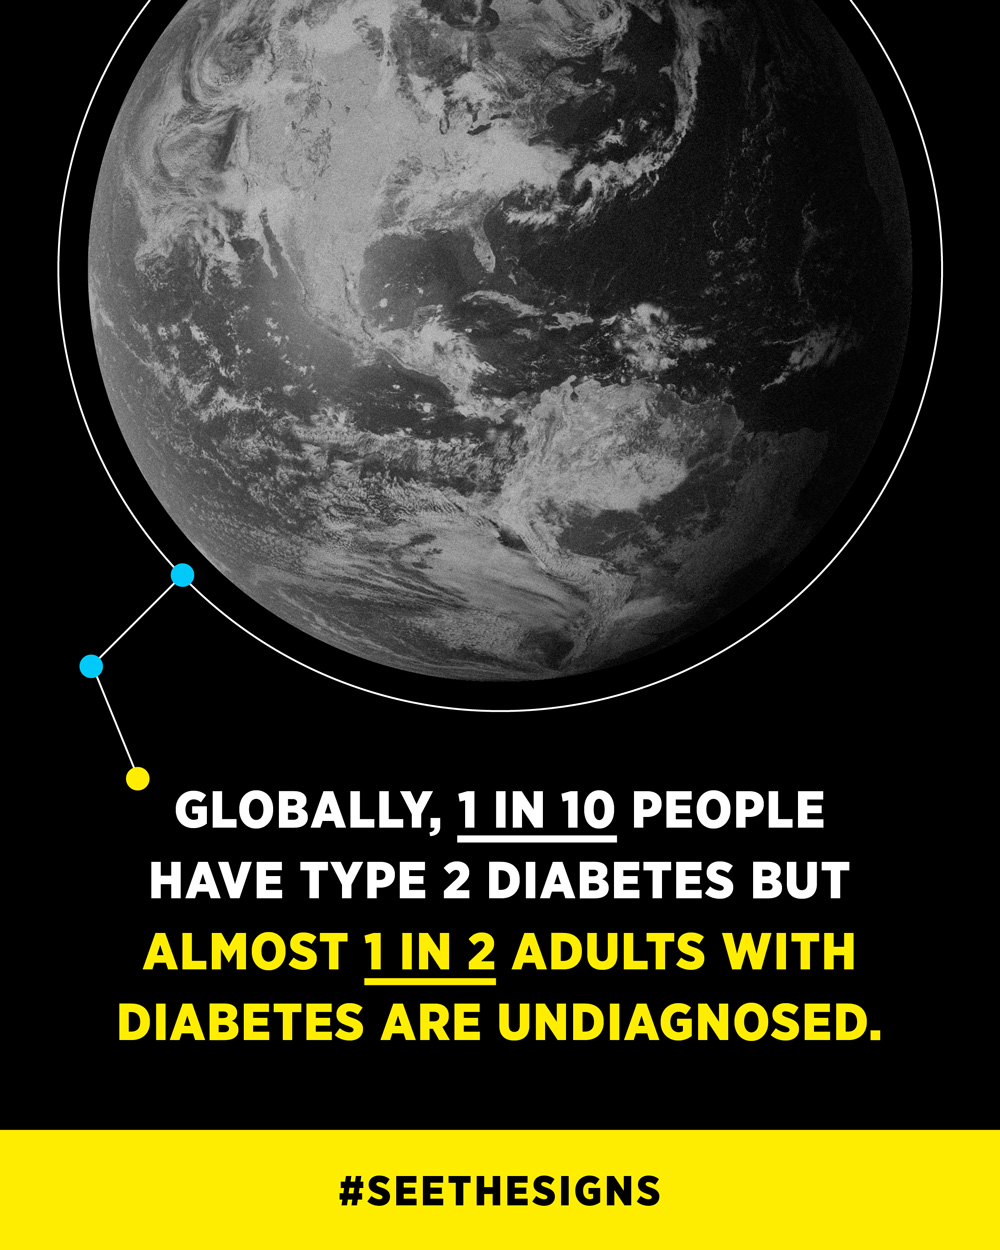 Globally, 1 in 10 people have type 2 diabetes but almost 1 in 2 adults with diabetes are undiagnosed